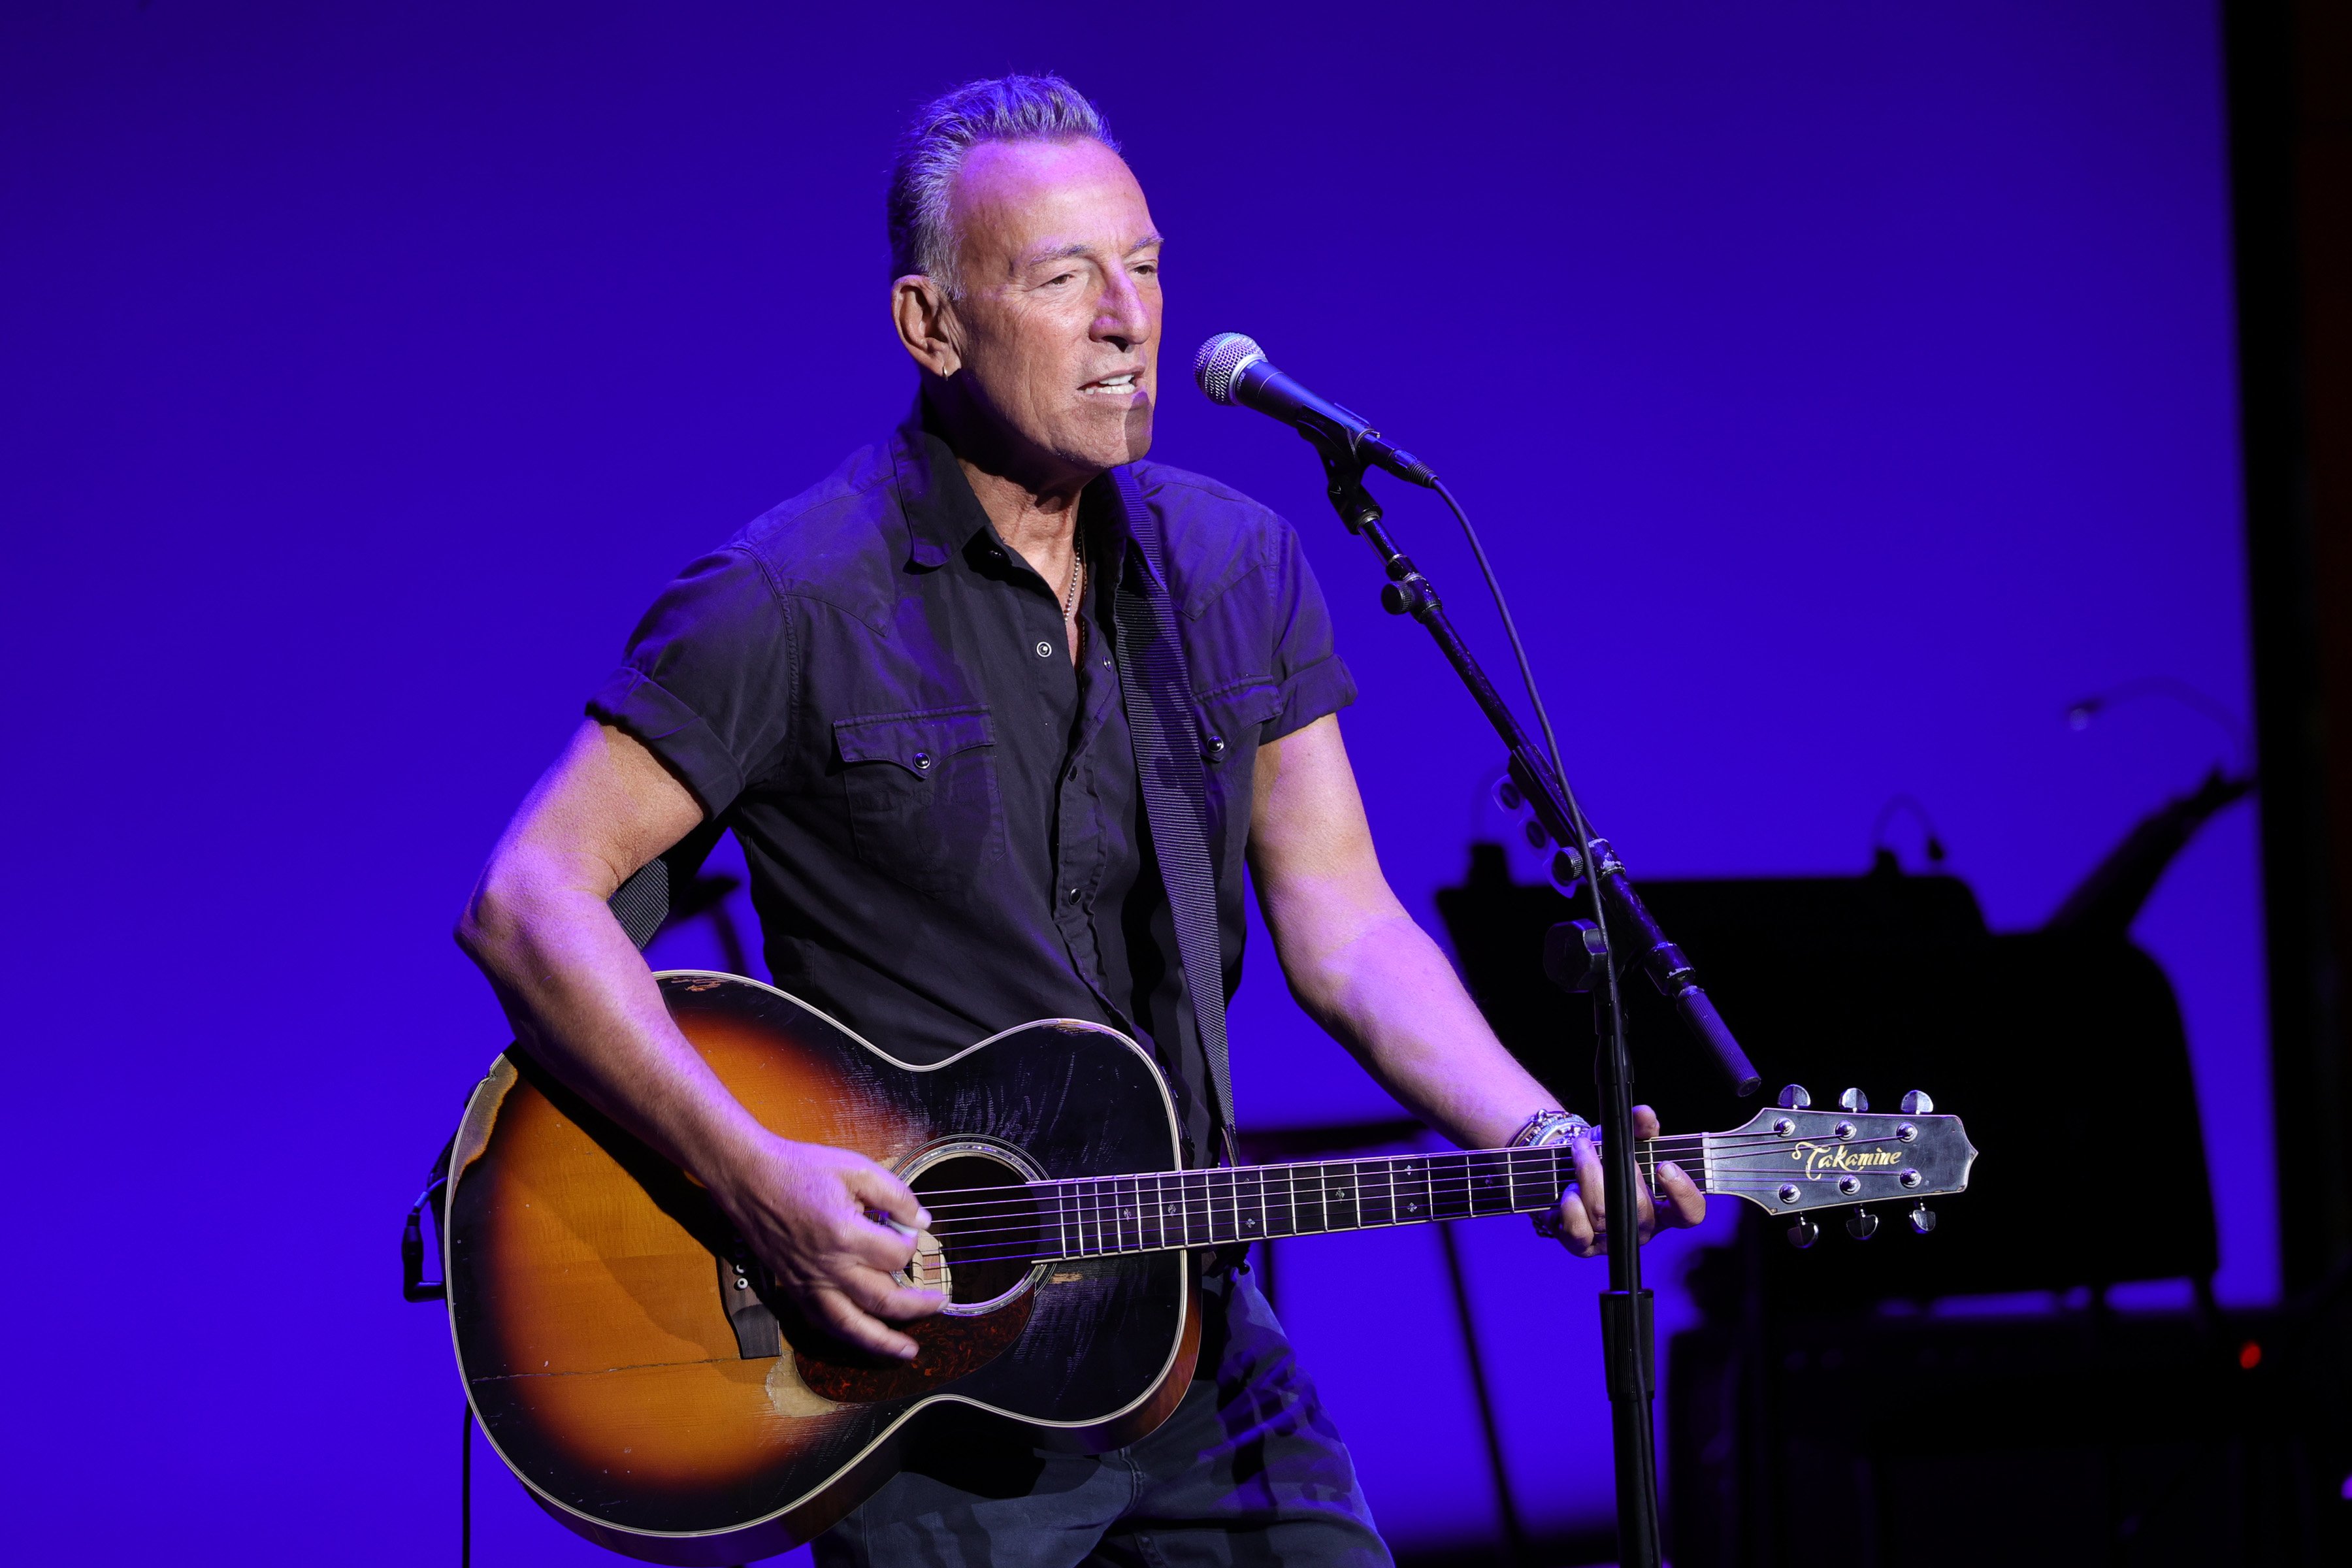 Bruce Springsteen performs during the 15th Annual Stand Up For Heroes benefit at Alice Tully Hall presented by Bob Woodruff Foundation and NY Comedy Festival